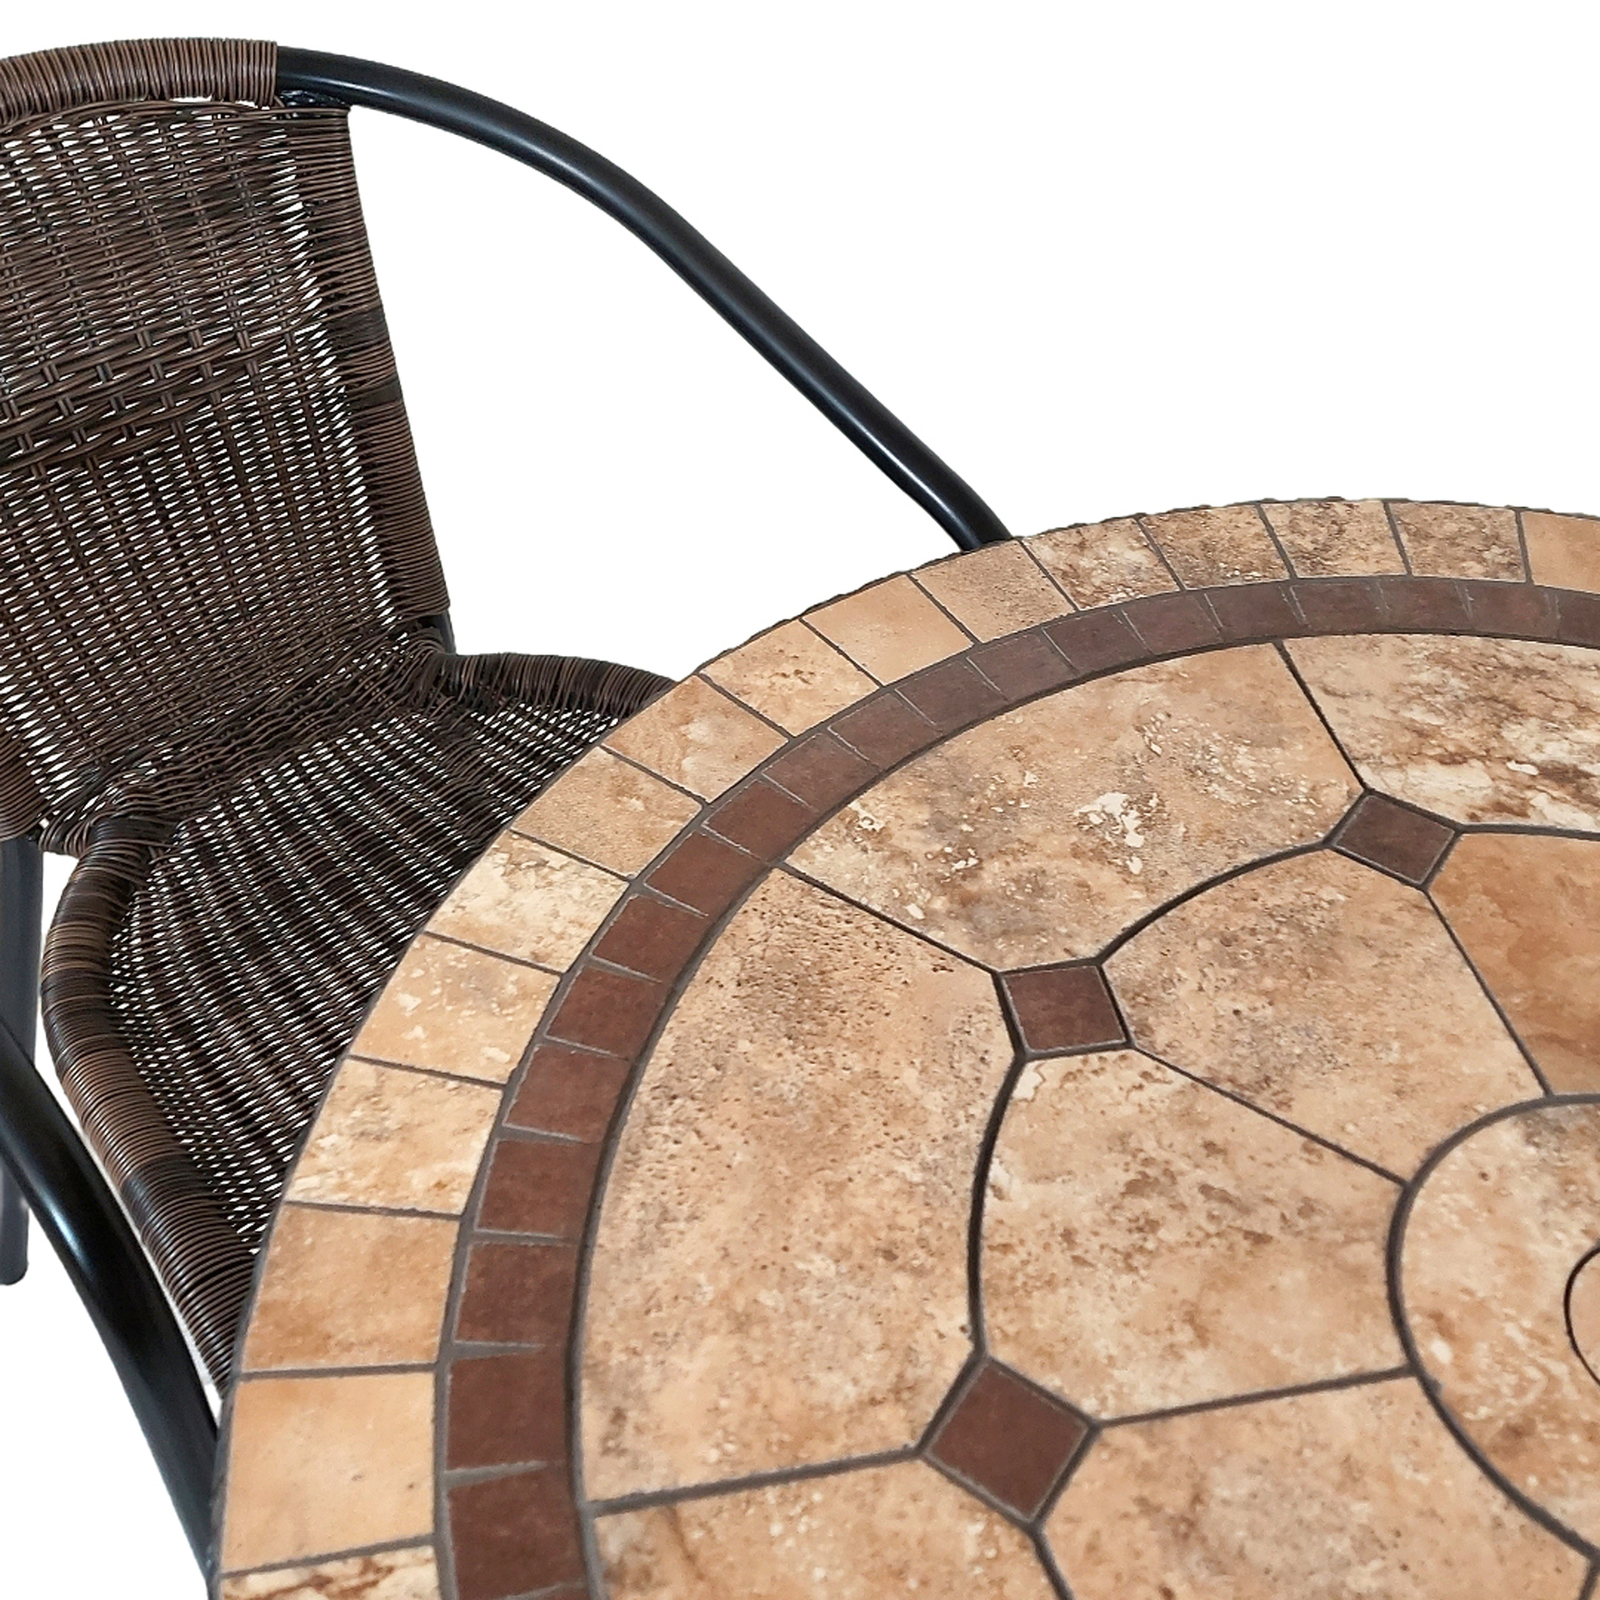 Exclusive Garden Richmond 76 cm Round Table with 2 San Remo Chairs Garden Set Dining Set Dining Sets Exclusive Garden   